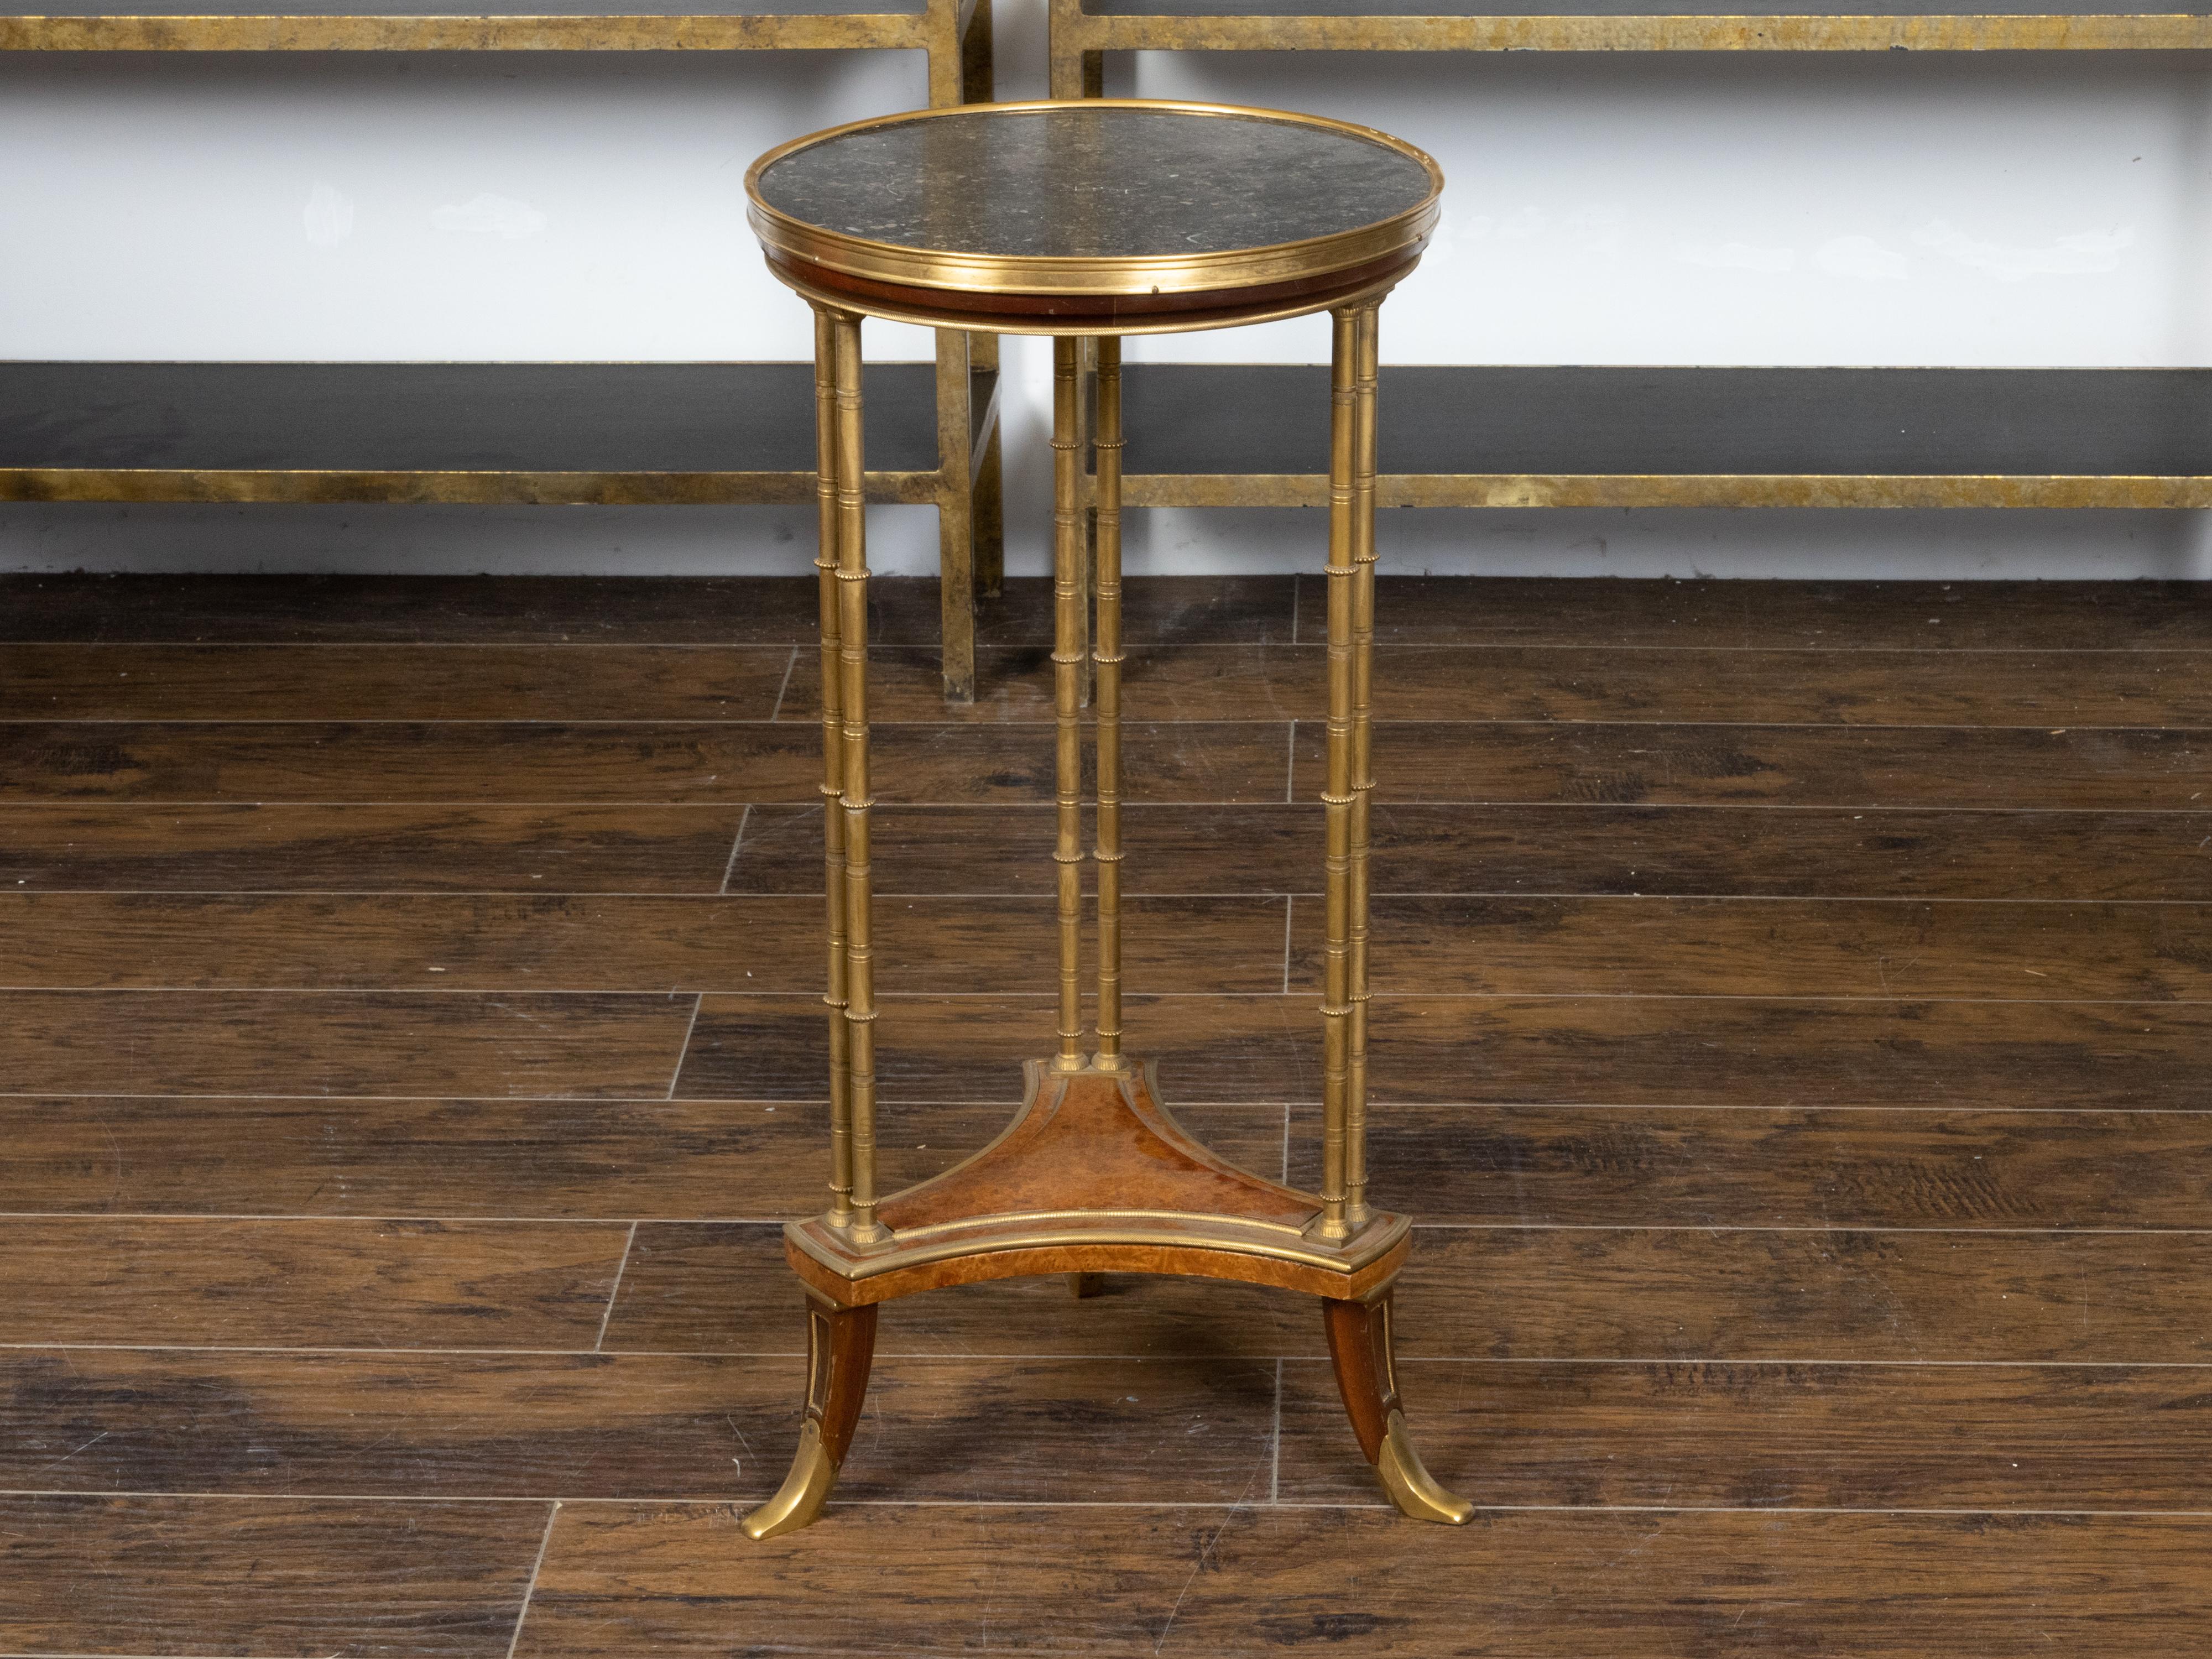 French 19th Century Bronze Guéridon Table with Black Marble Top and Burl Shelf For Sale 1